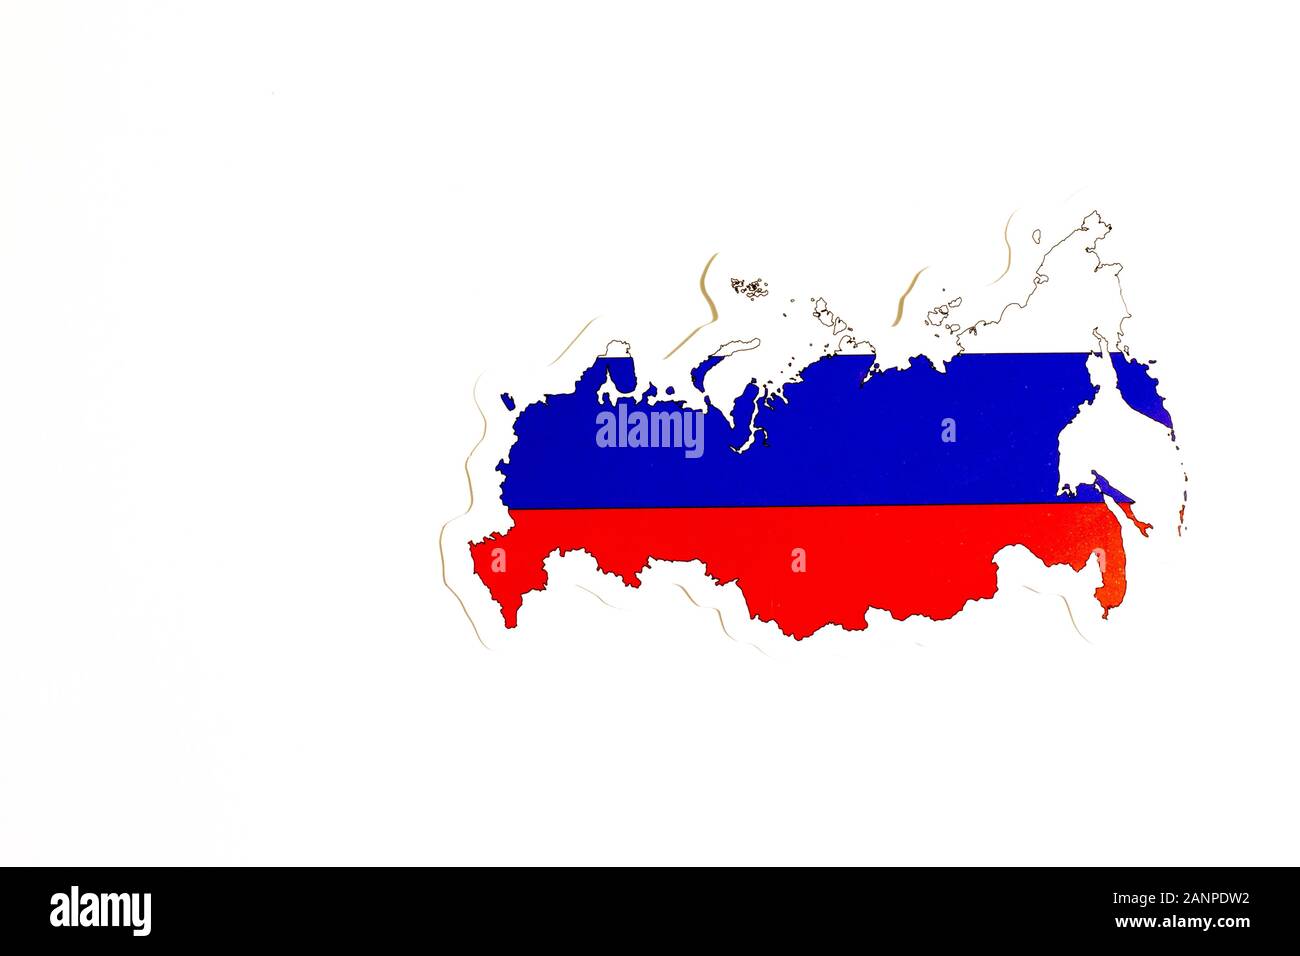 Los Angeles, California, USA - 17 January 2020: National flag of Russia. Country outline on white background with copy space. Politics illustration Stock Photo